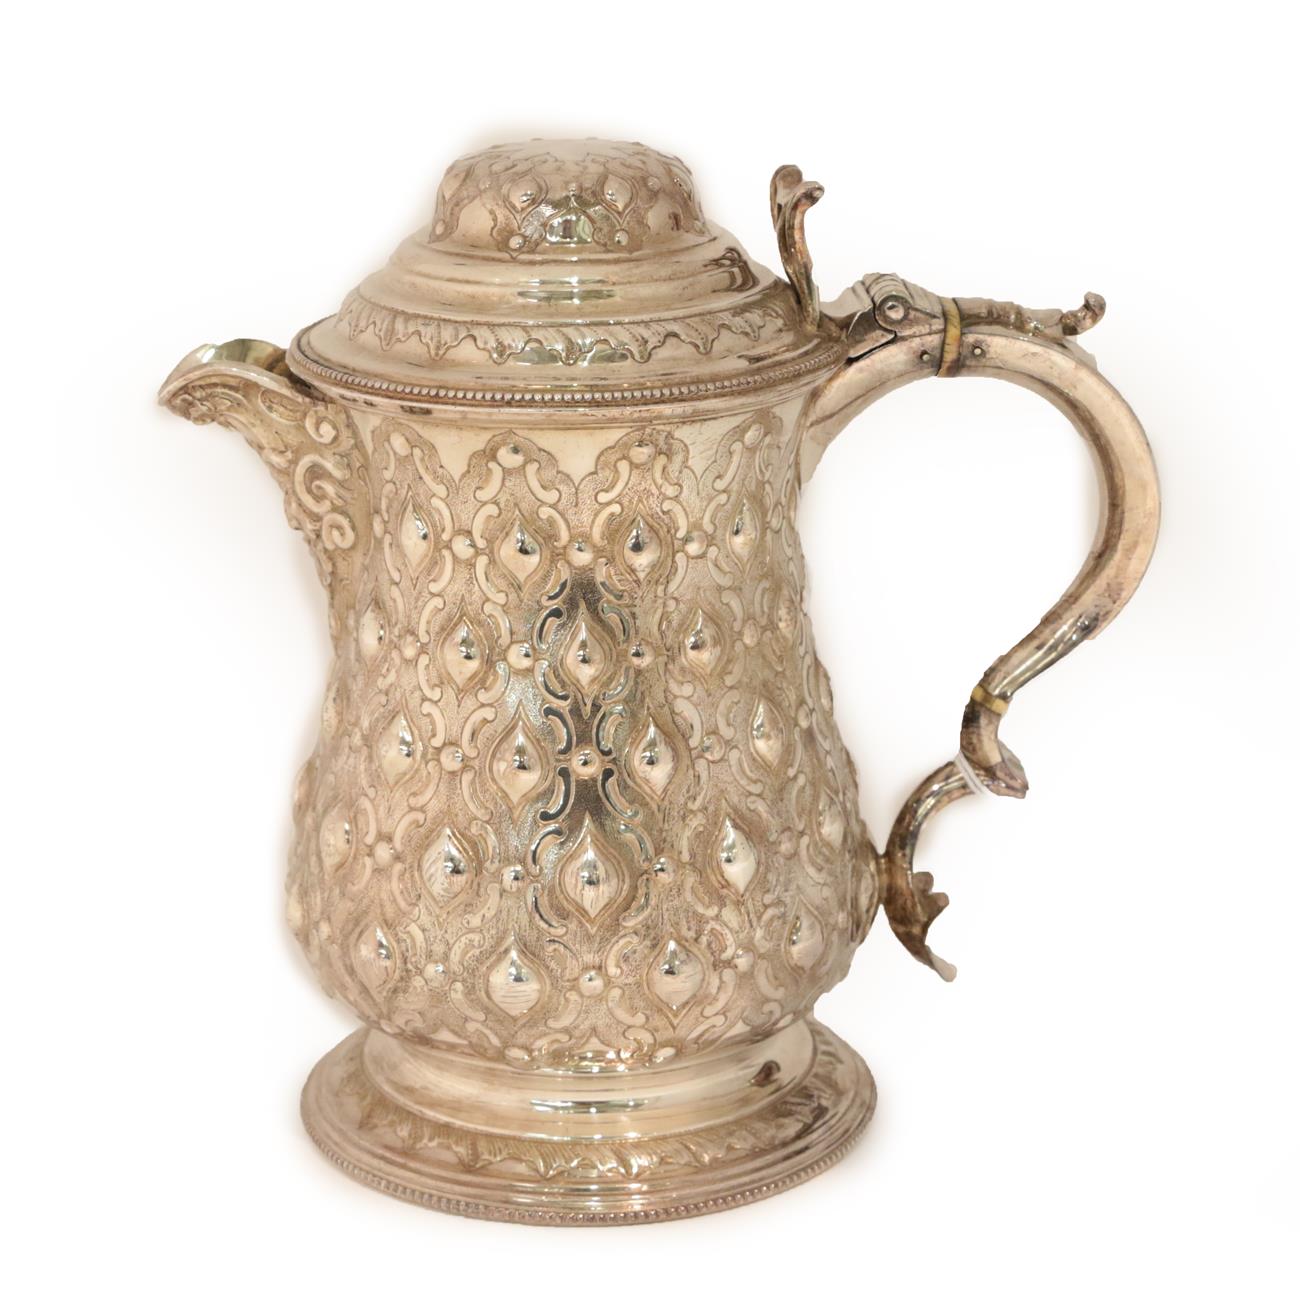 Lot 19 - A Victorian Silver Plate Jug, by Martin Hall and Co., Second Half 19th century, baluster and on...